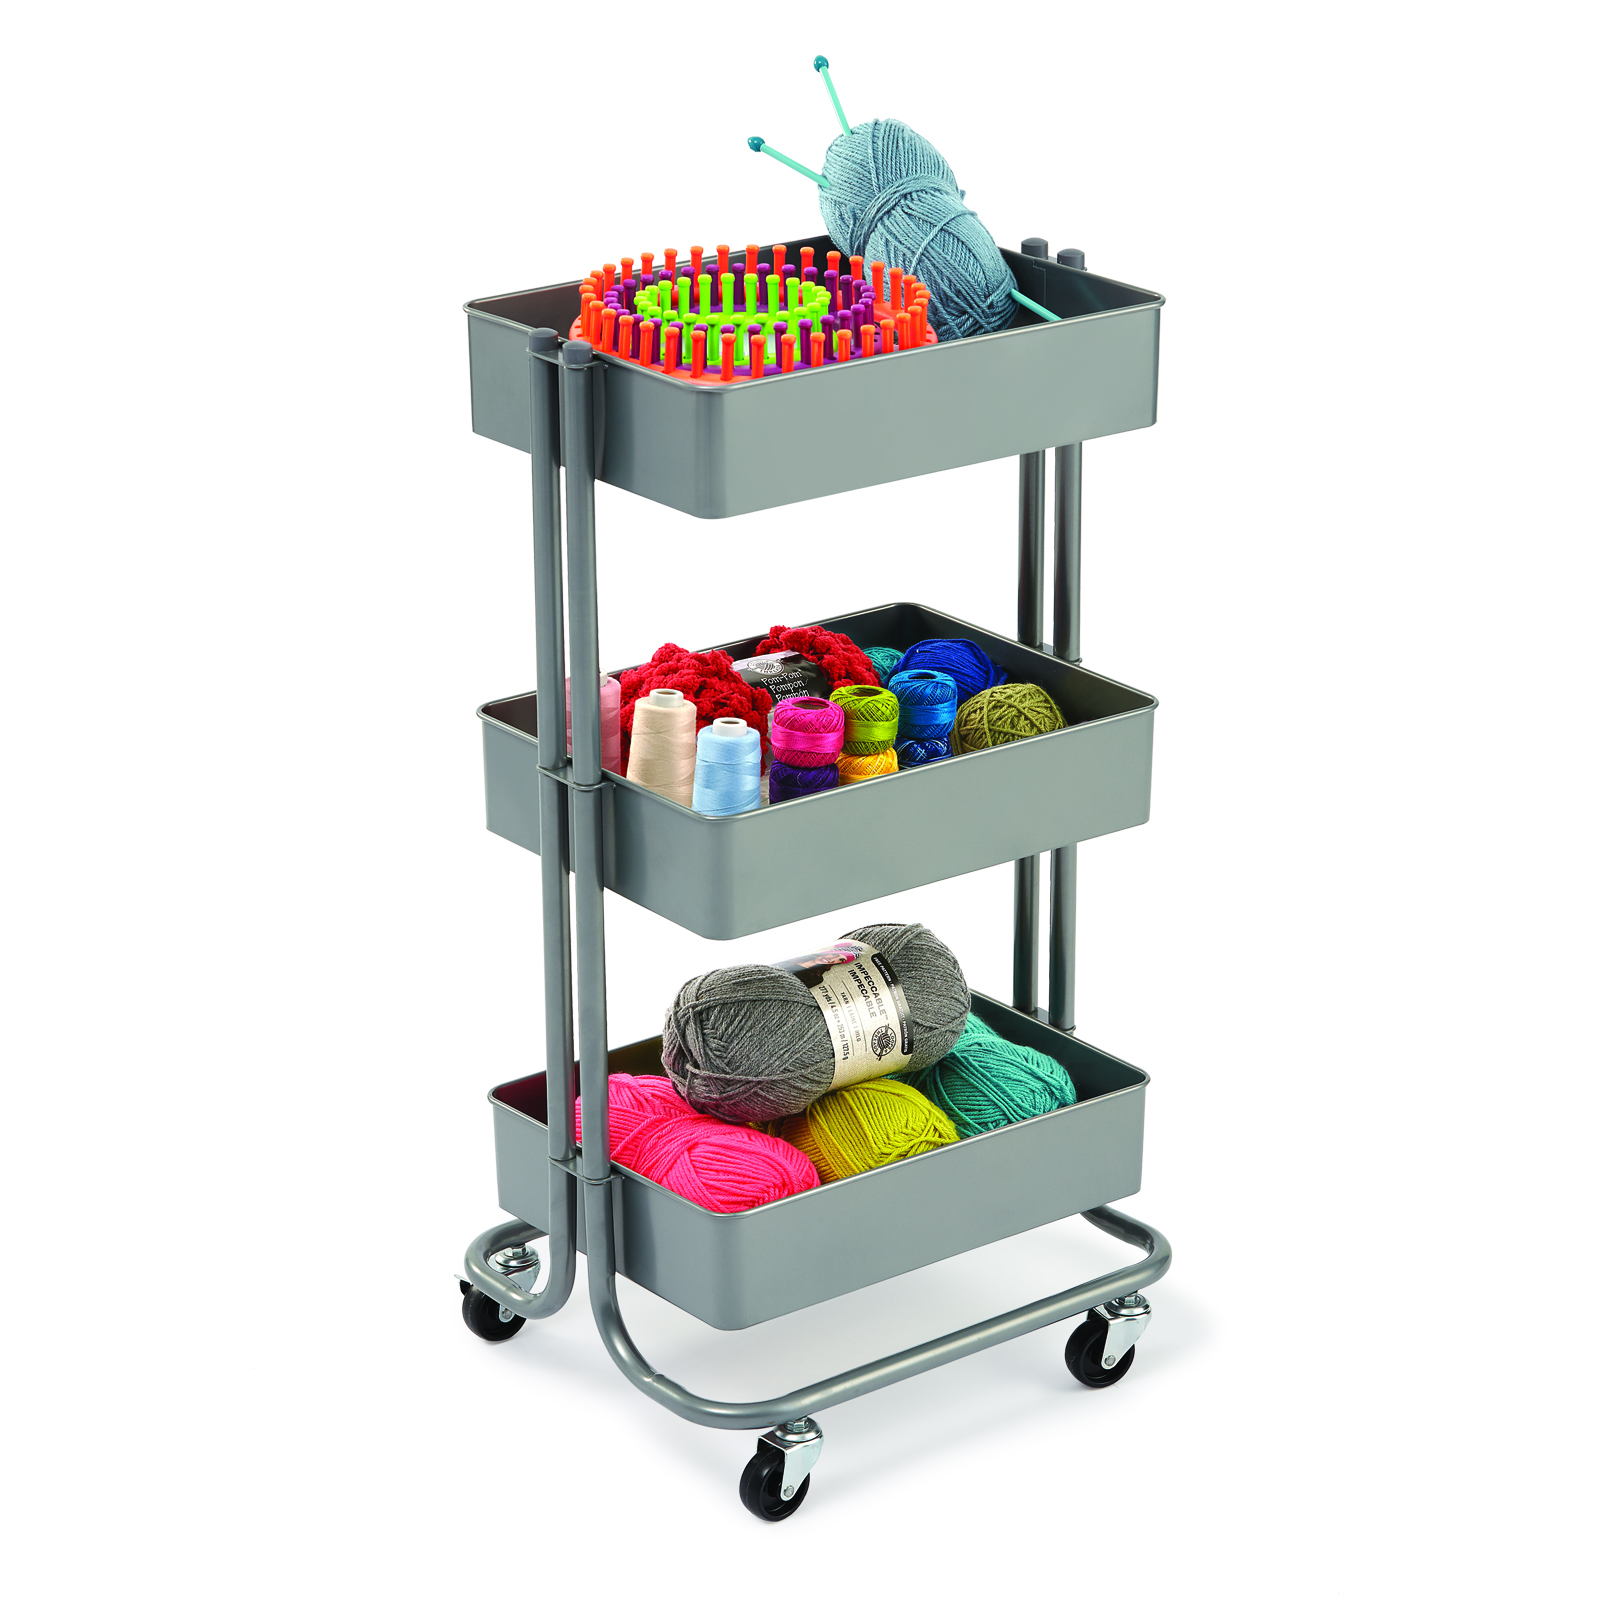 Lexington Rolling Cart in Grey from Michaels